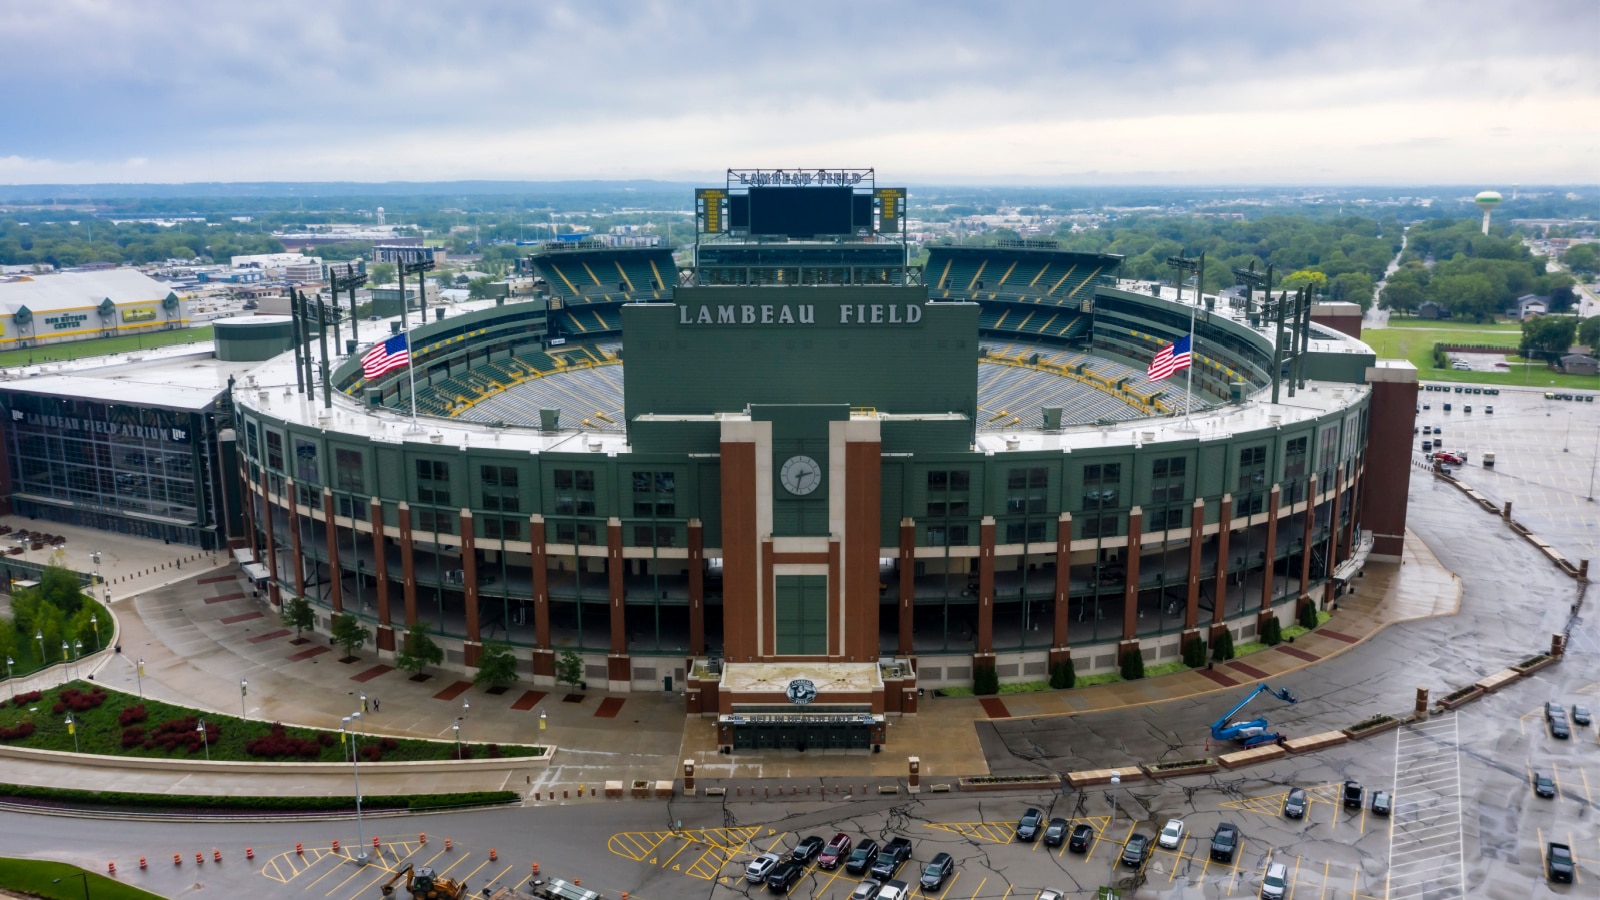 June 25, 2019 - Green Bay, Wisconsin, USA: Historic Lambeau Field, home of the Green Bay Packers and also known as The Frozen Tundra